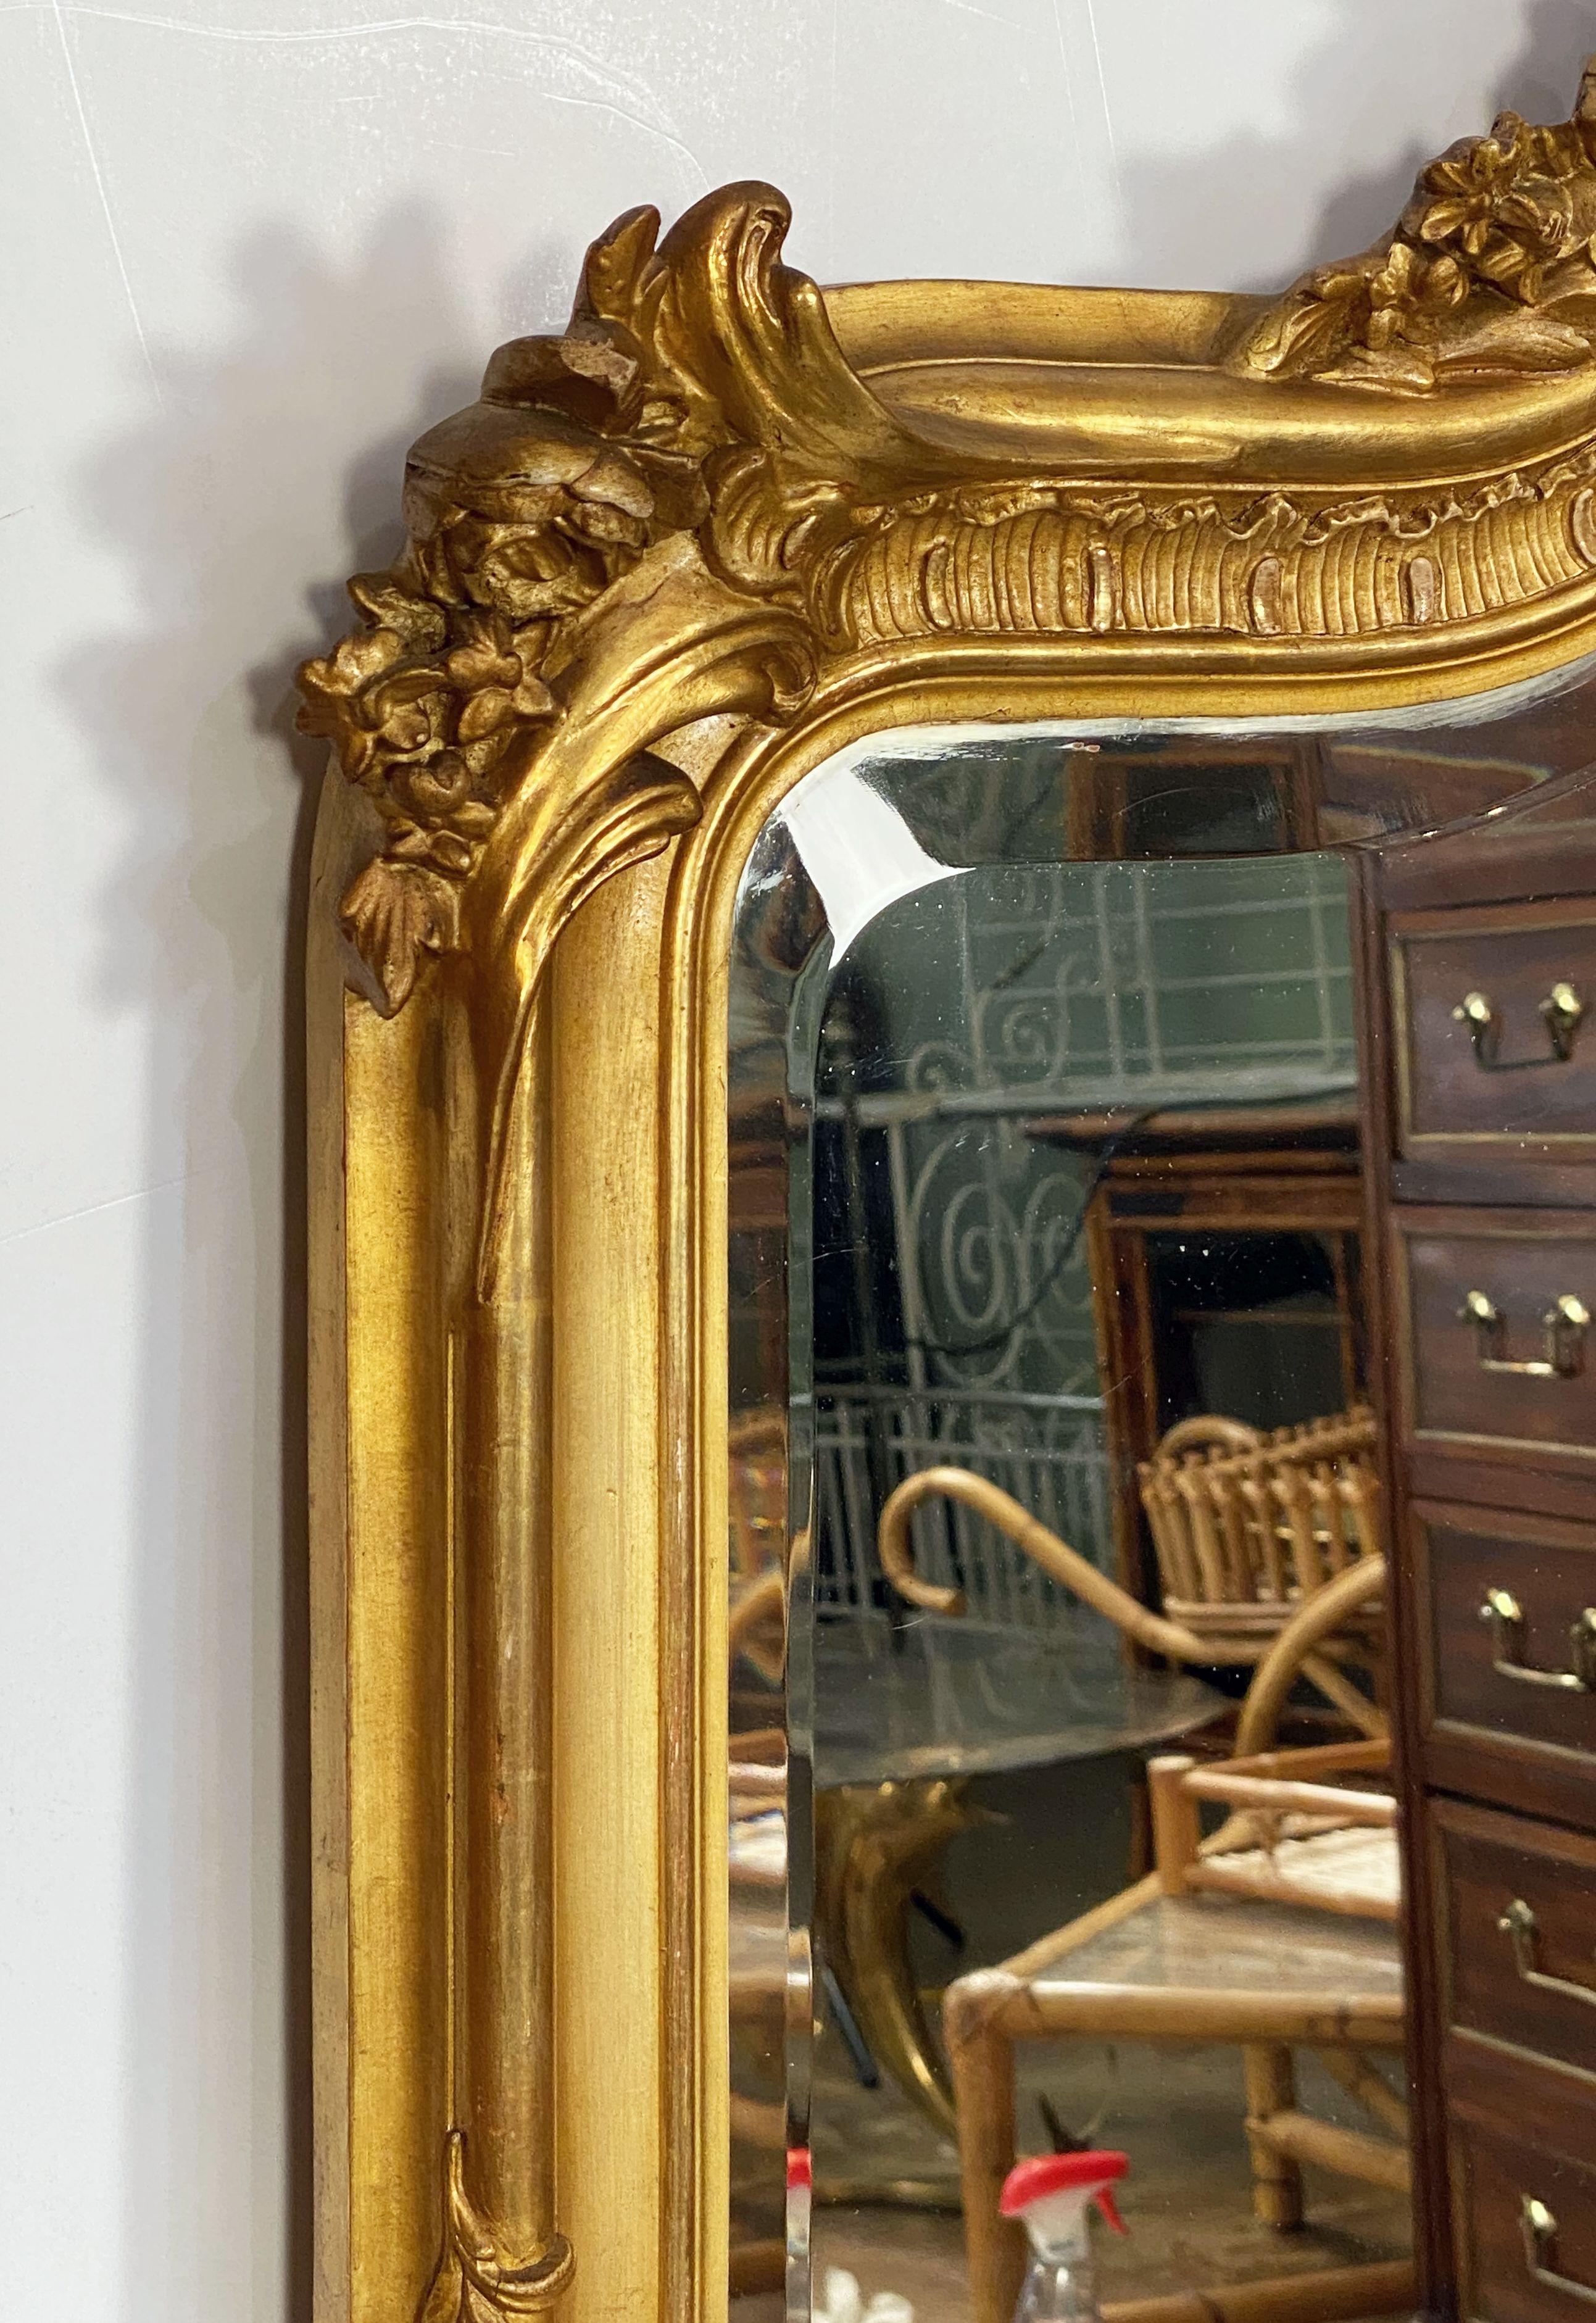 Large French Gilt Pier Mirror from the 19th Century (H 56 x W 37) For Sale 8